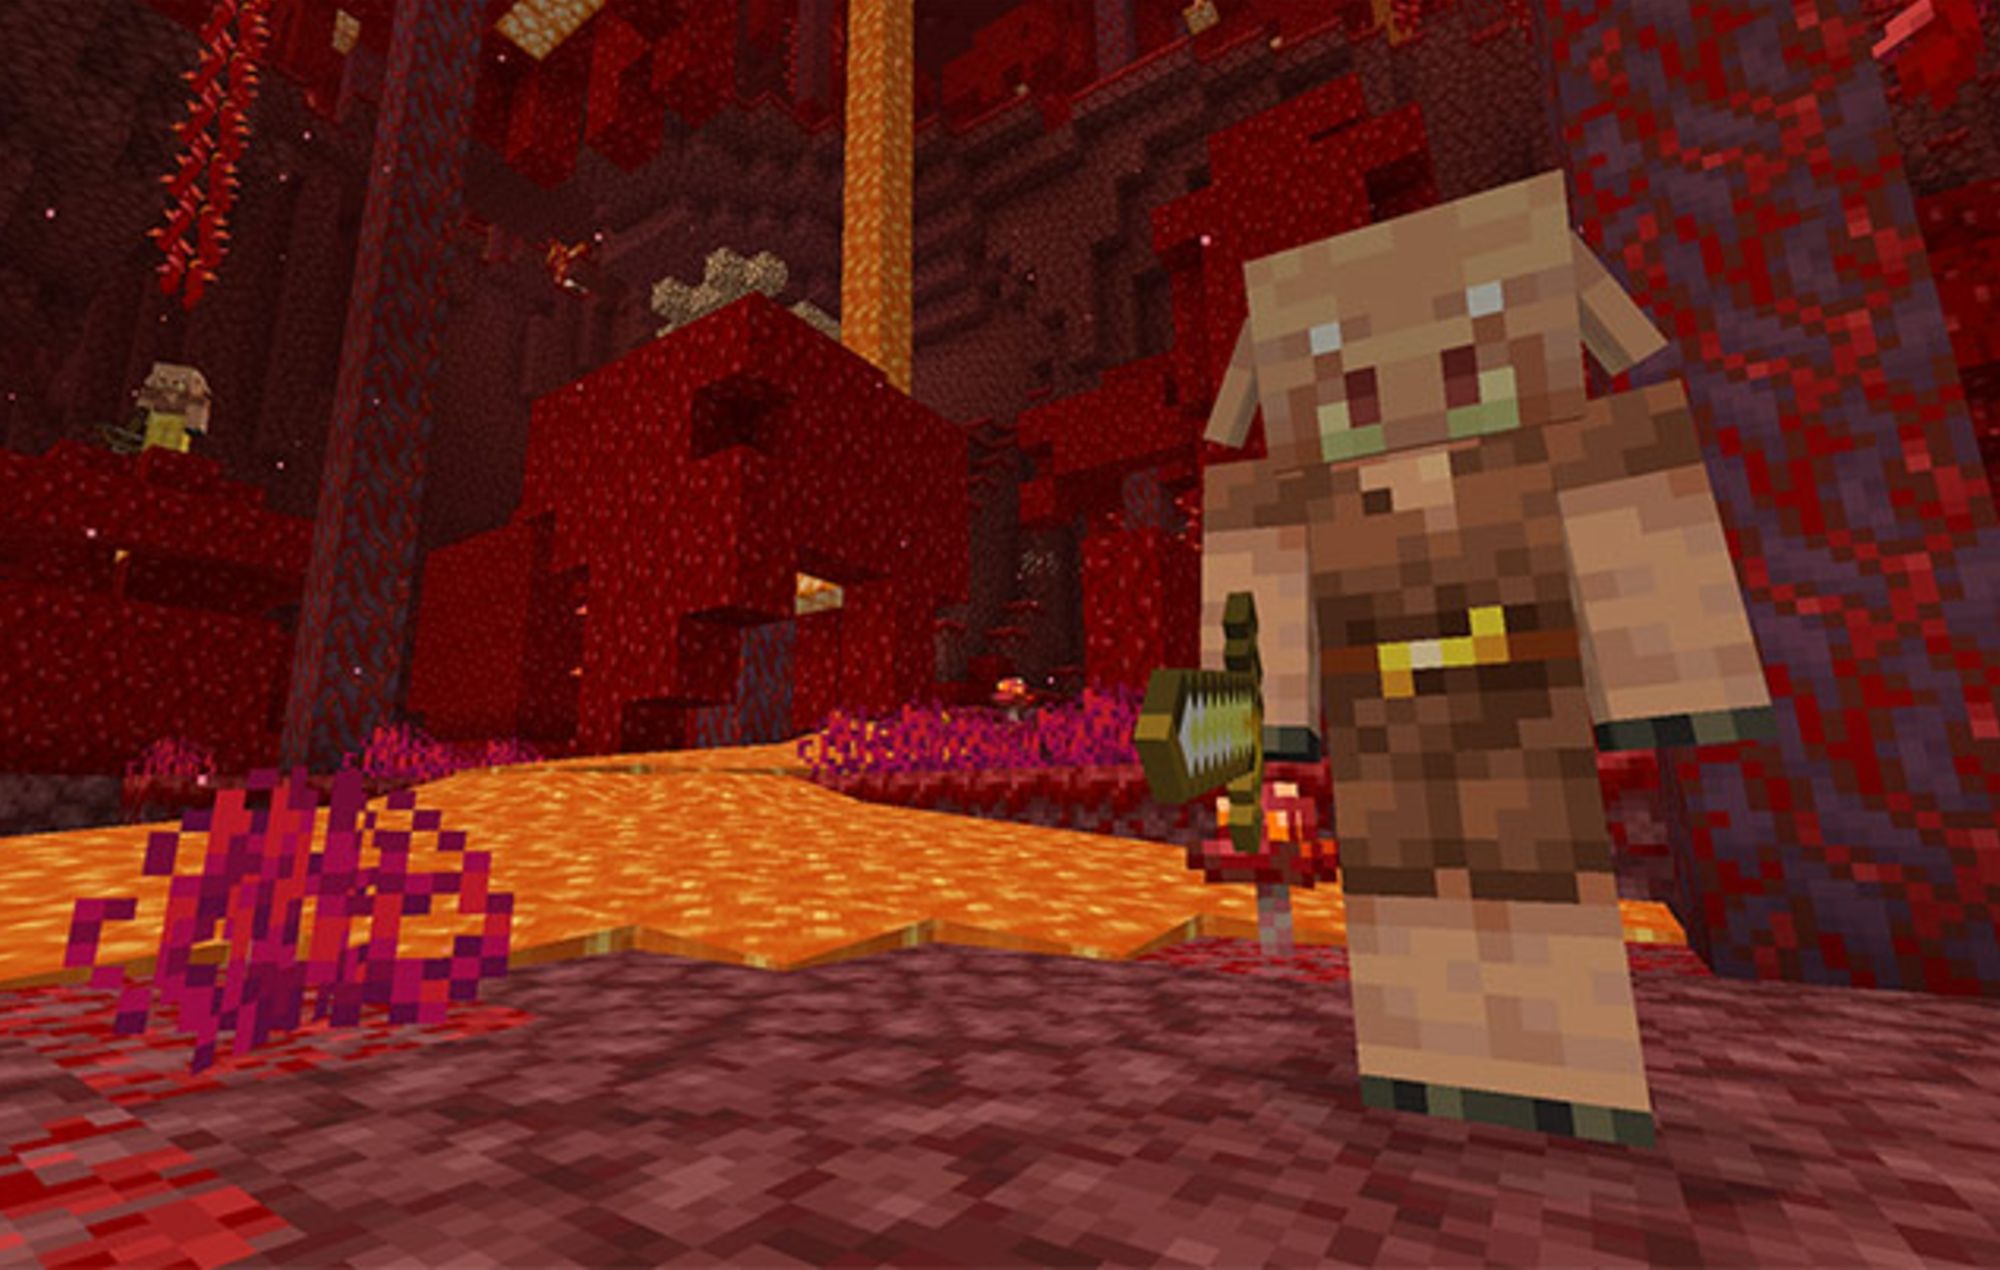 Mojang reveals 'The Nether Update' for 'Minecraft' to launch next week